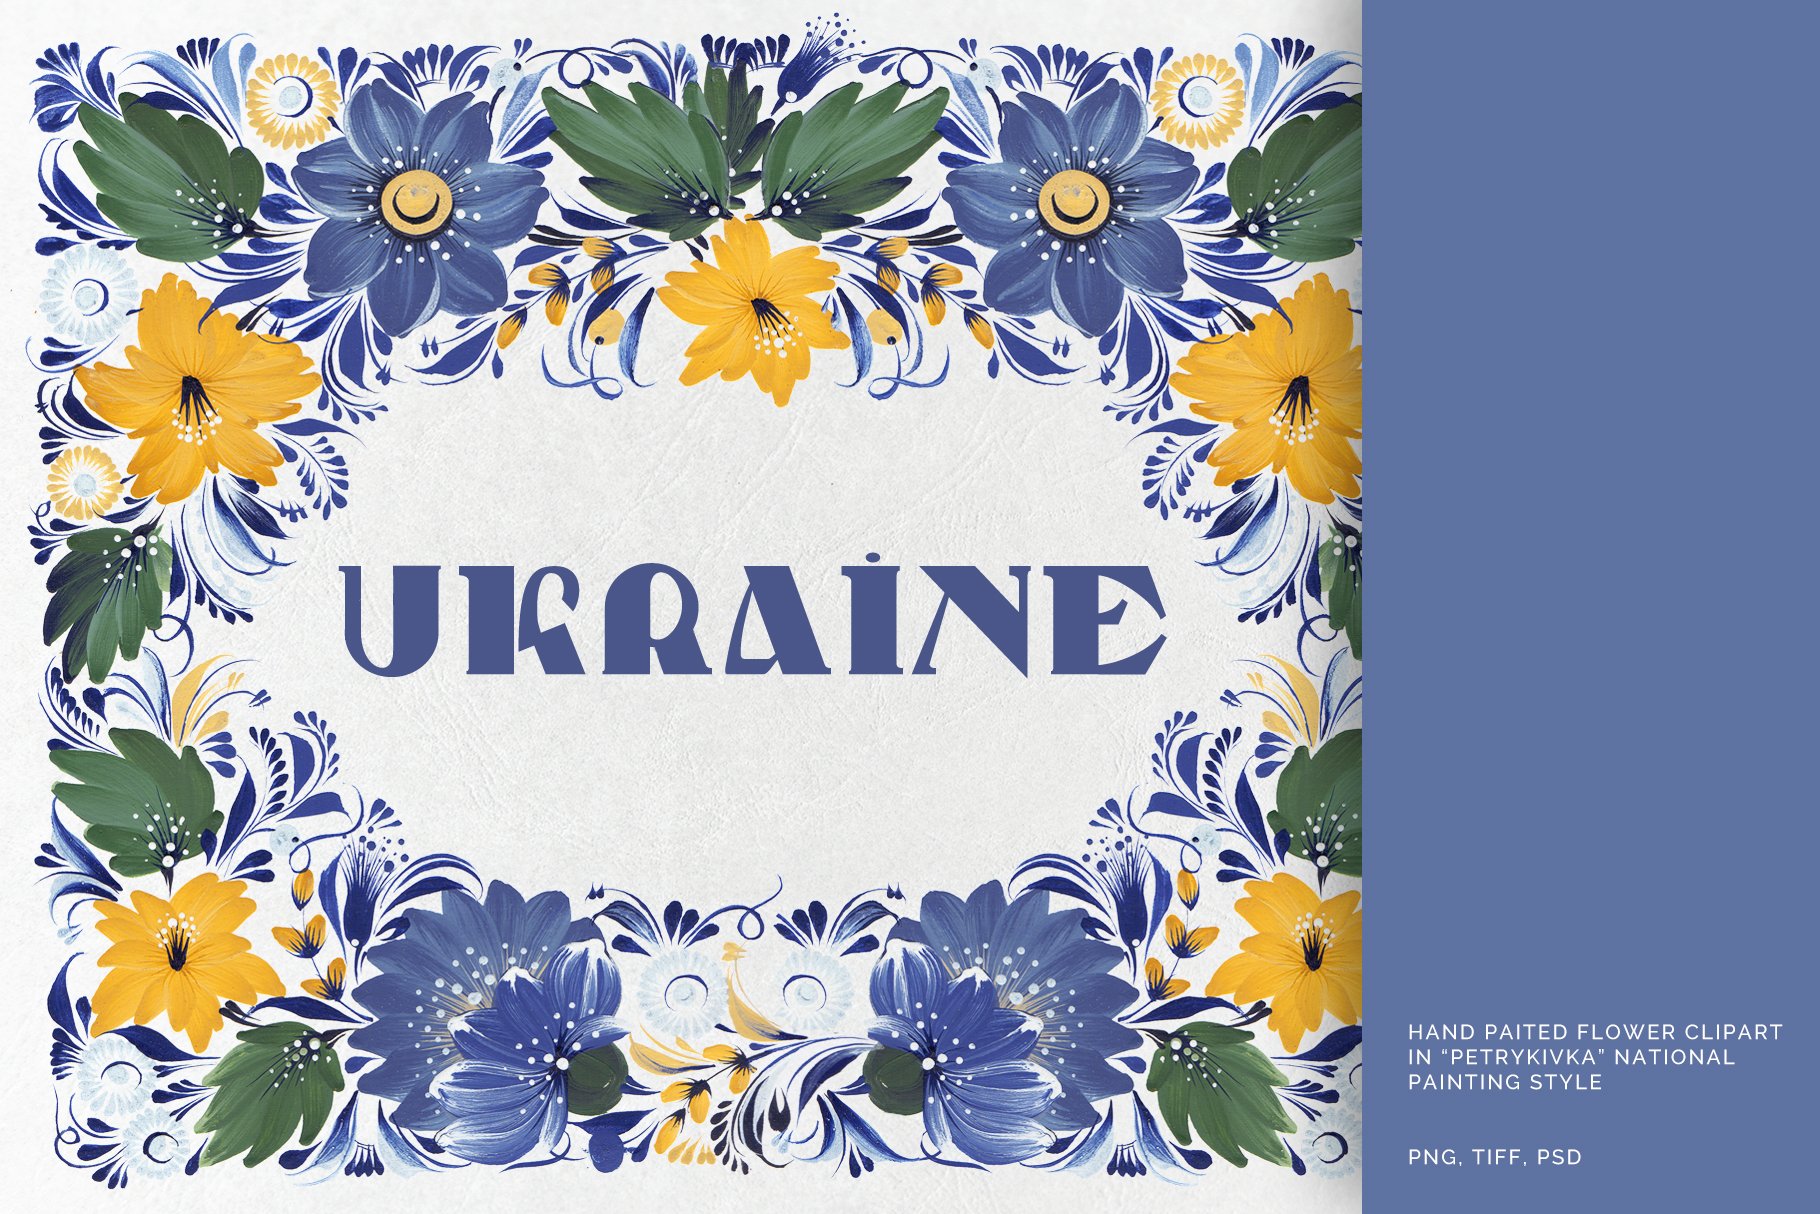 Ukraine support flowers cover image.